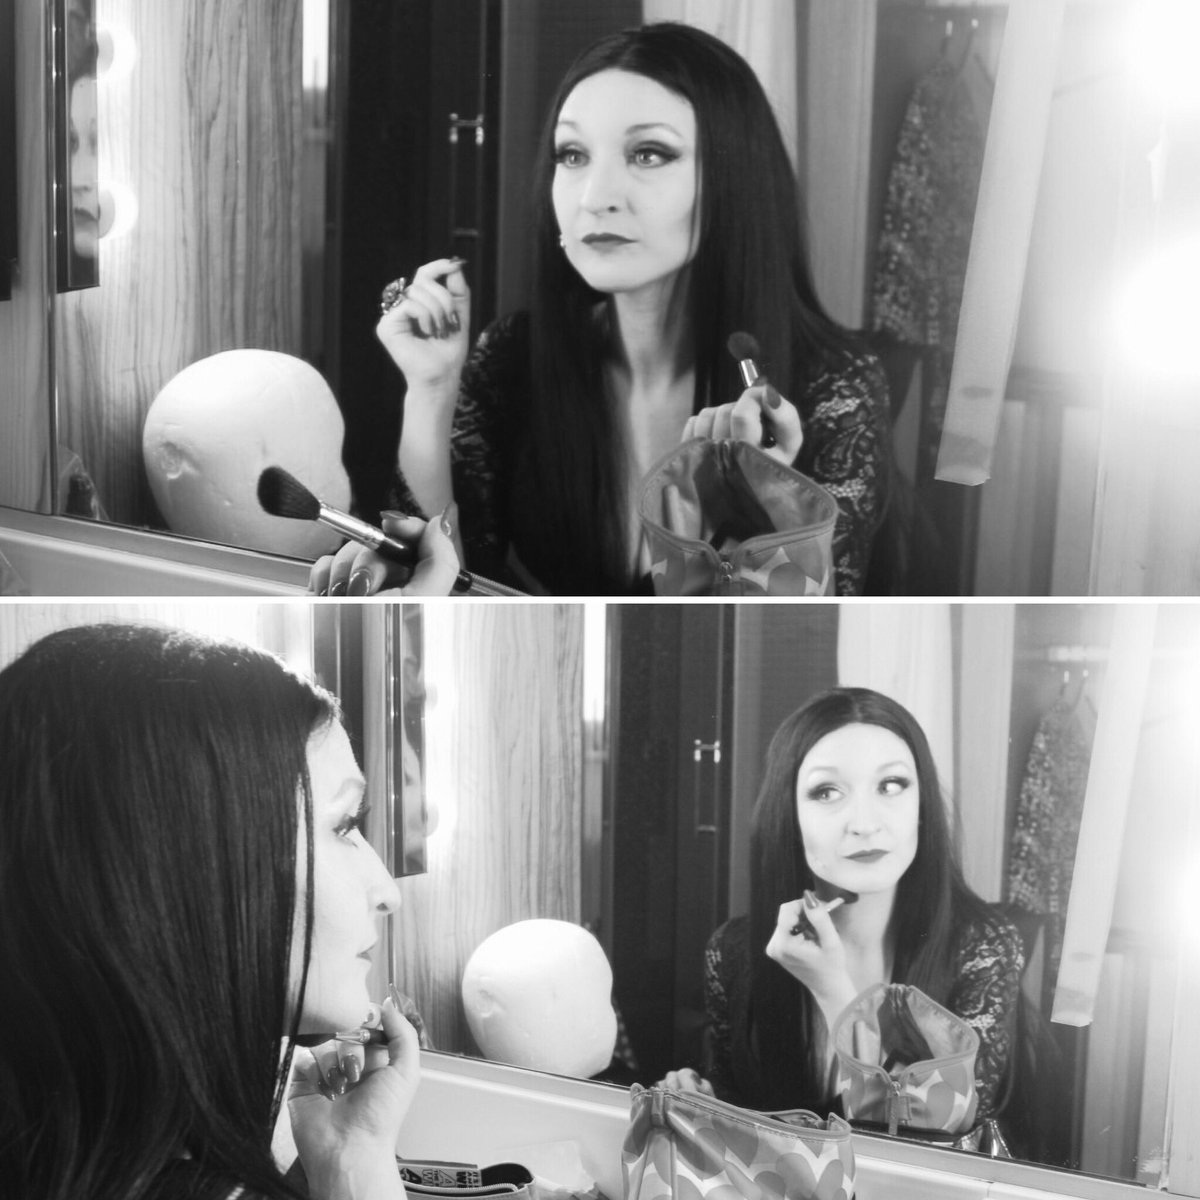 Oh to be #Morticia once more 🖤 #AddamsFamily #backstage #theatrelife #theatremakeup ✨(photo credit: April Rand )✨